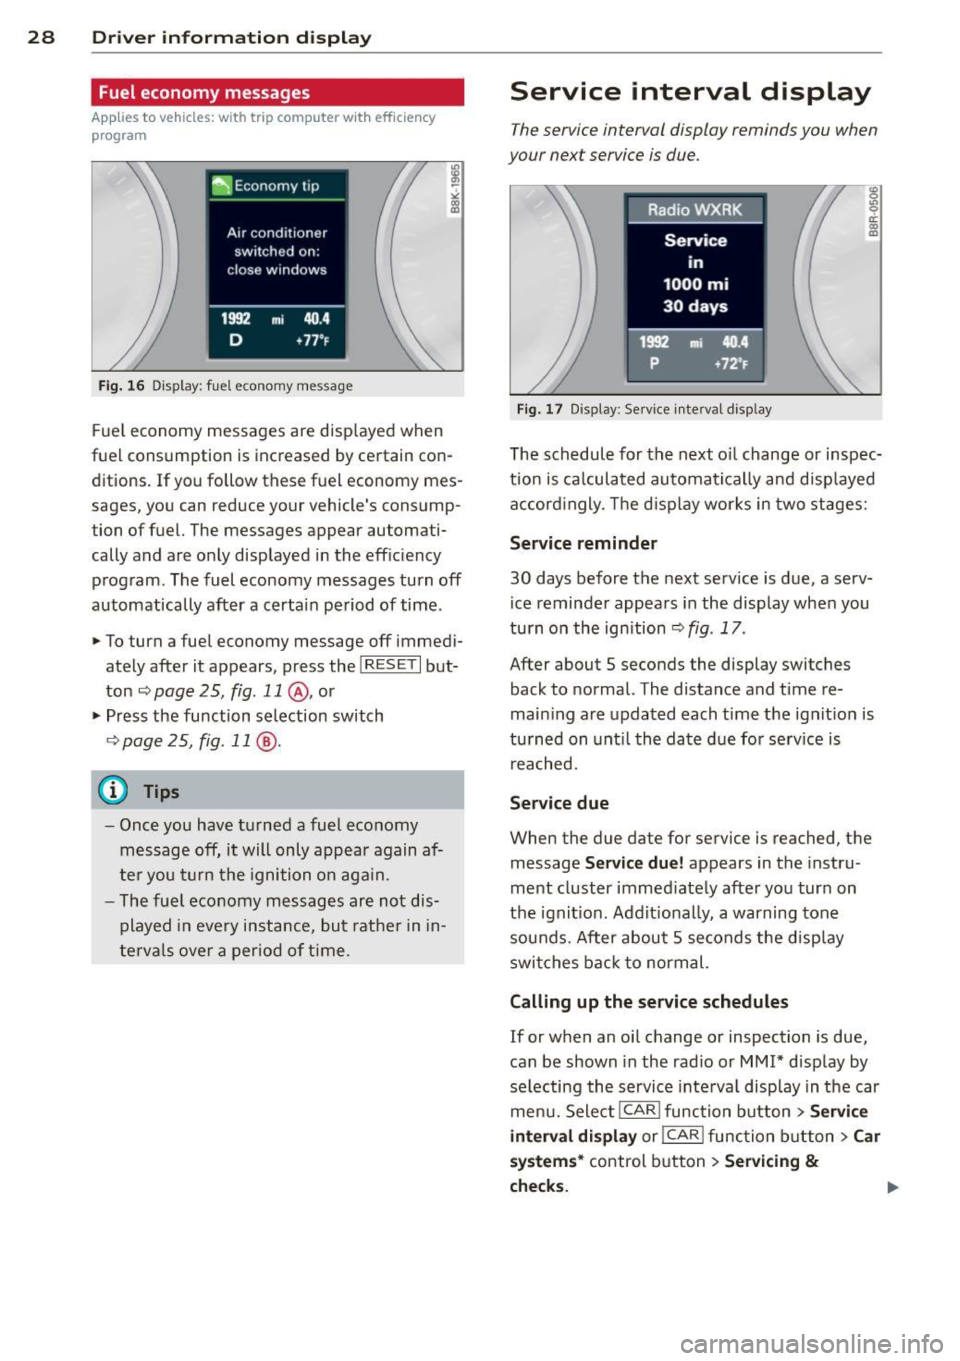 AUDI A4 2015 Owners Manual 28  Driver  information  d isplay 
Fuel  economy  messages 
App lies  to vehicles:  with  trip  computer  w ith  eff ici ency 
program 
Fig.  16  Display:  fuel  economy  message 
F ue l economy  mess